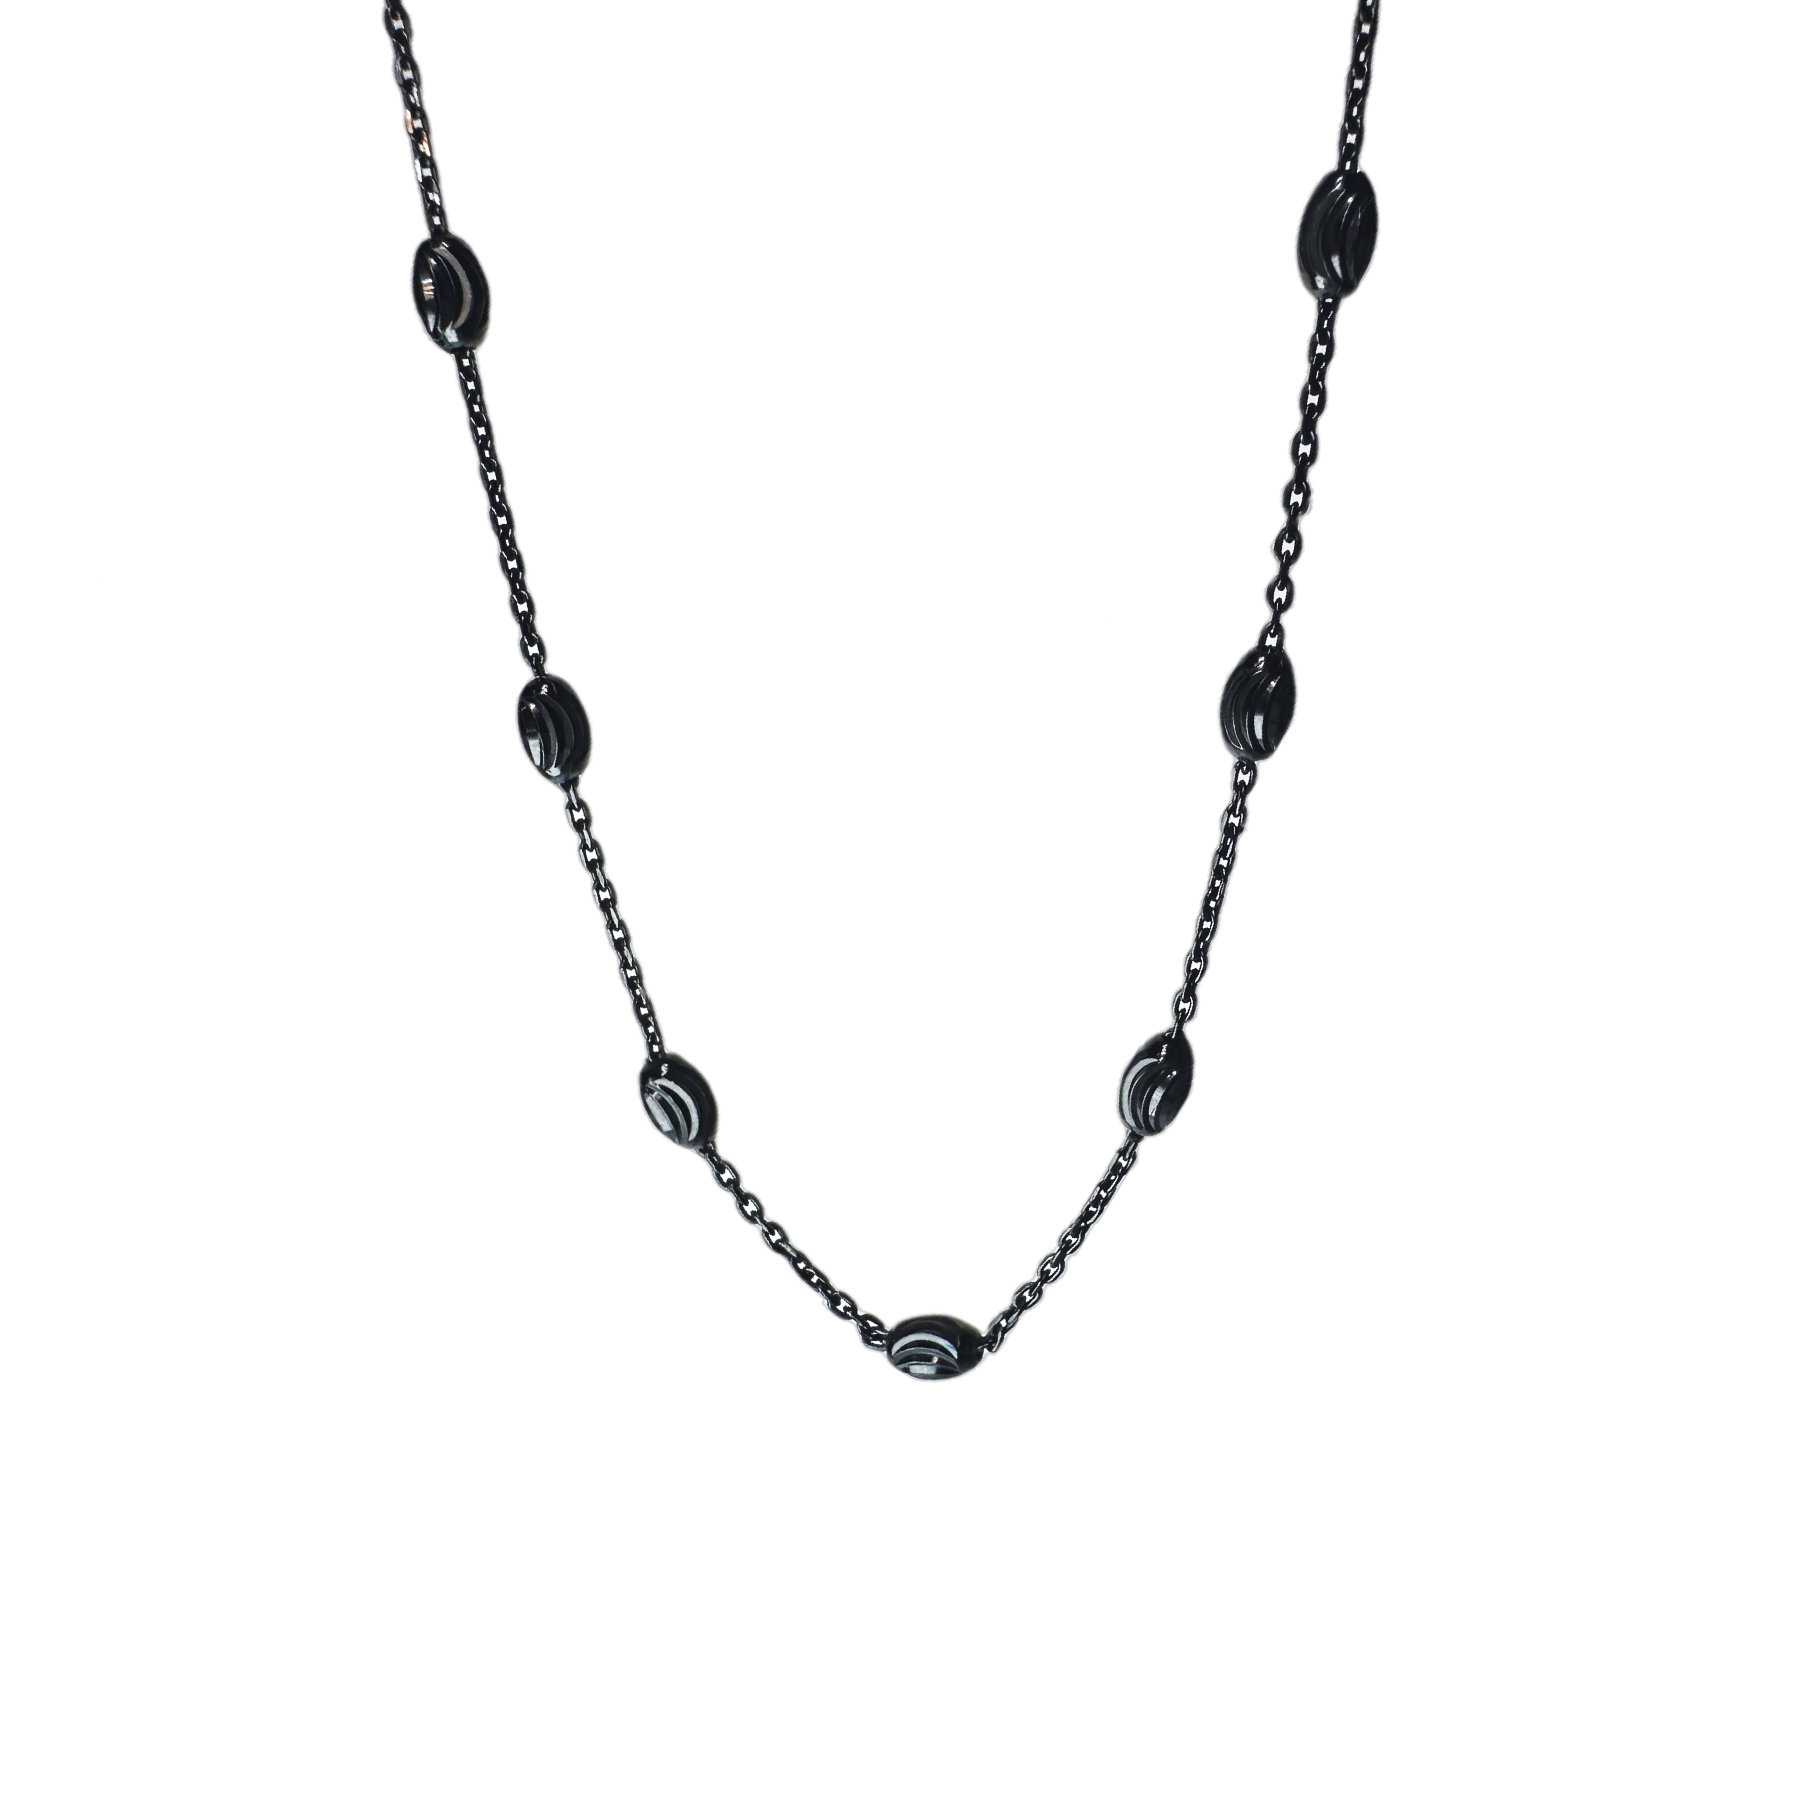 "Luna" Blackened Silver Moon Chain Necklace